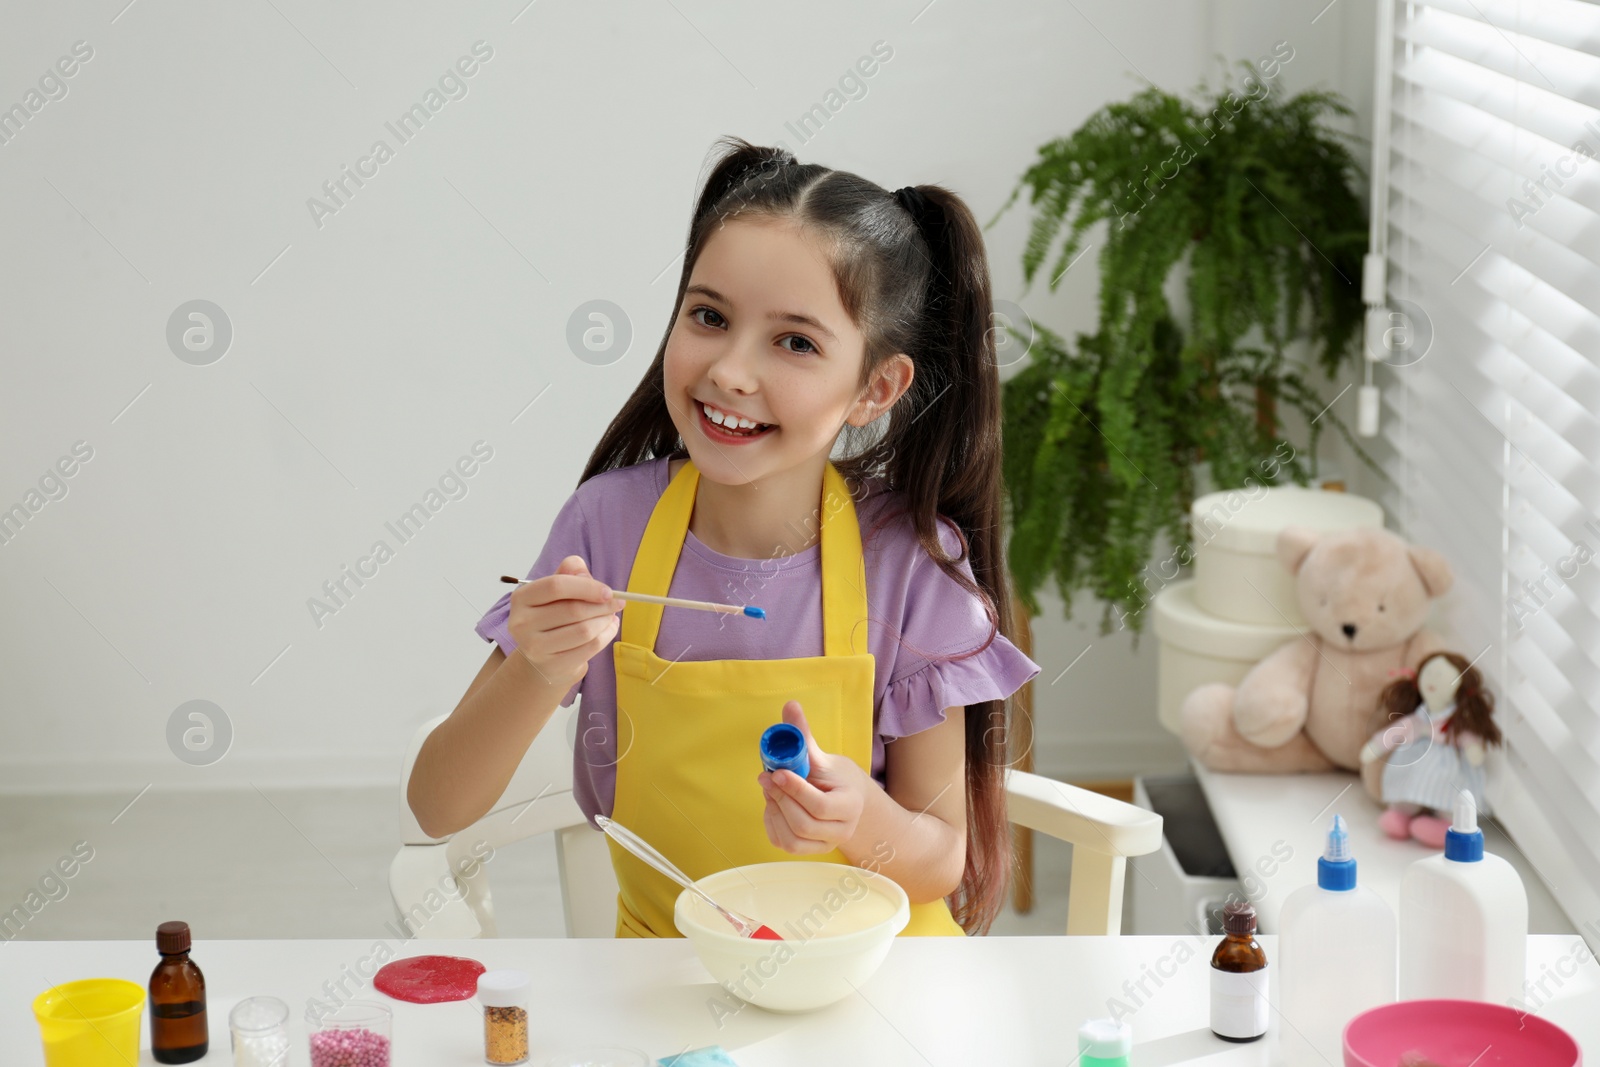 Photo of Cute little girl making homemade slime toy at table in room